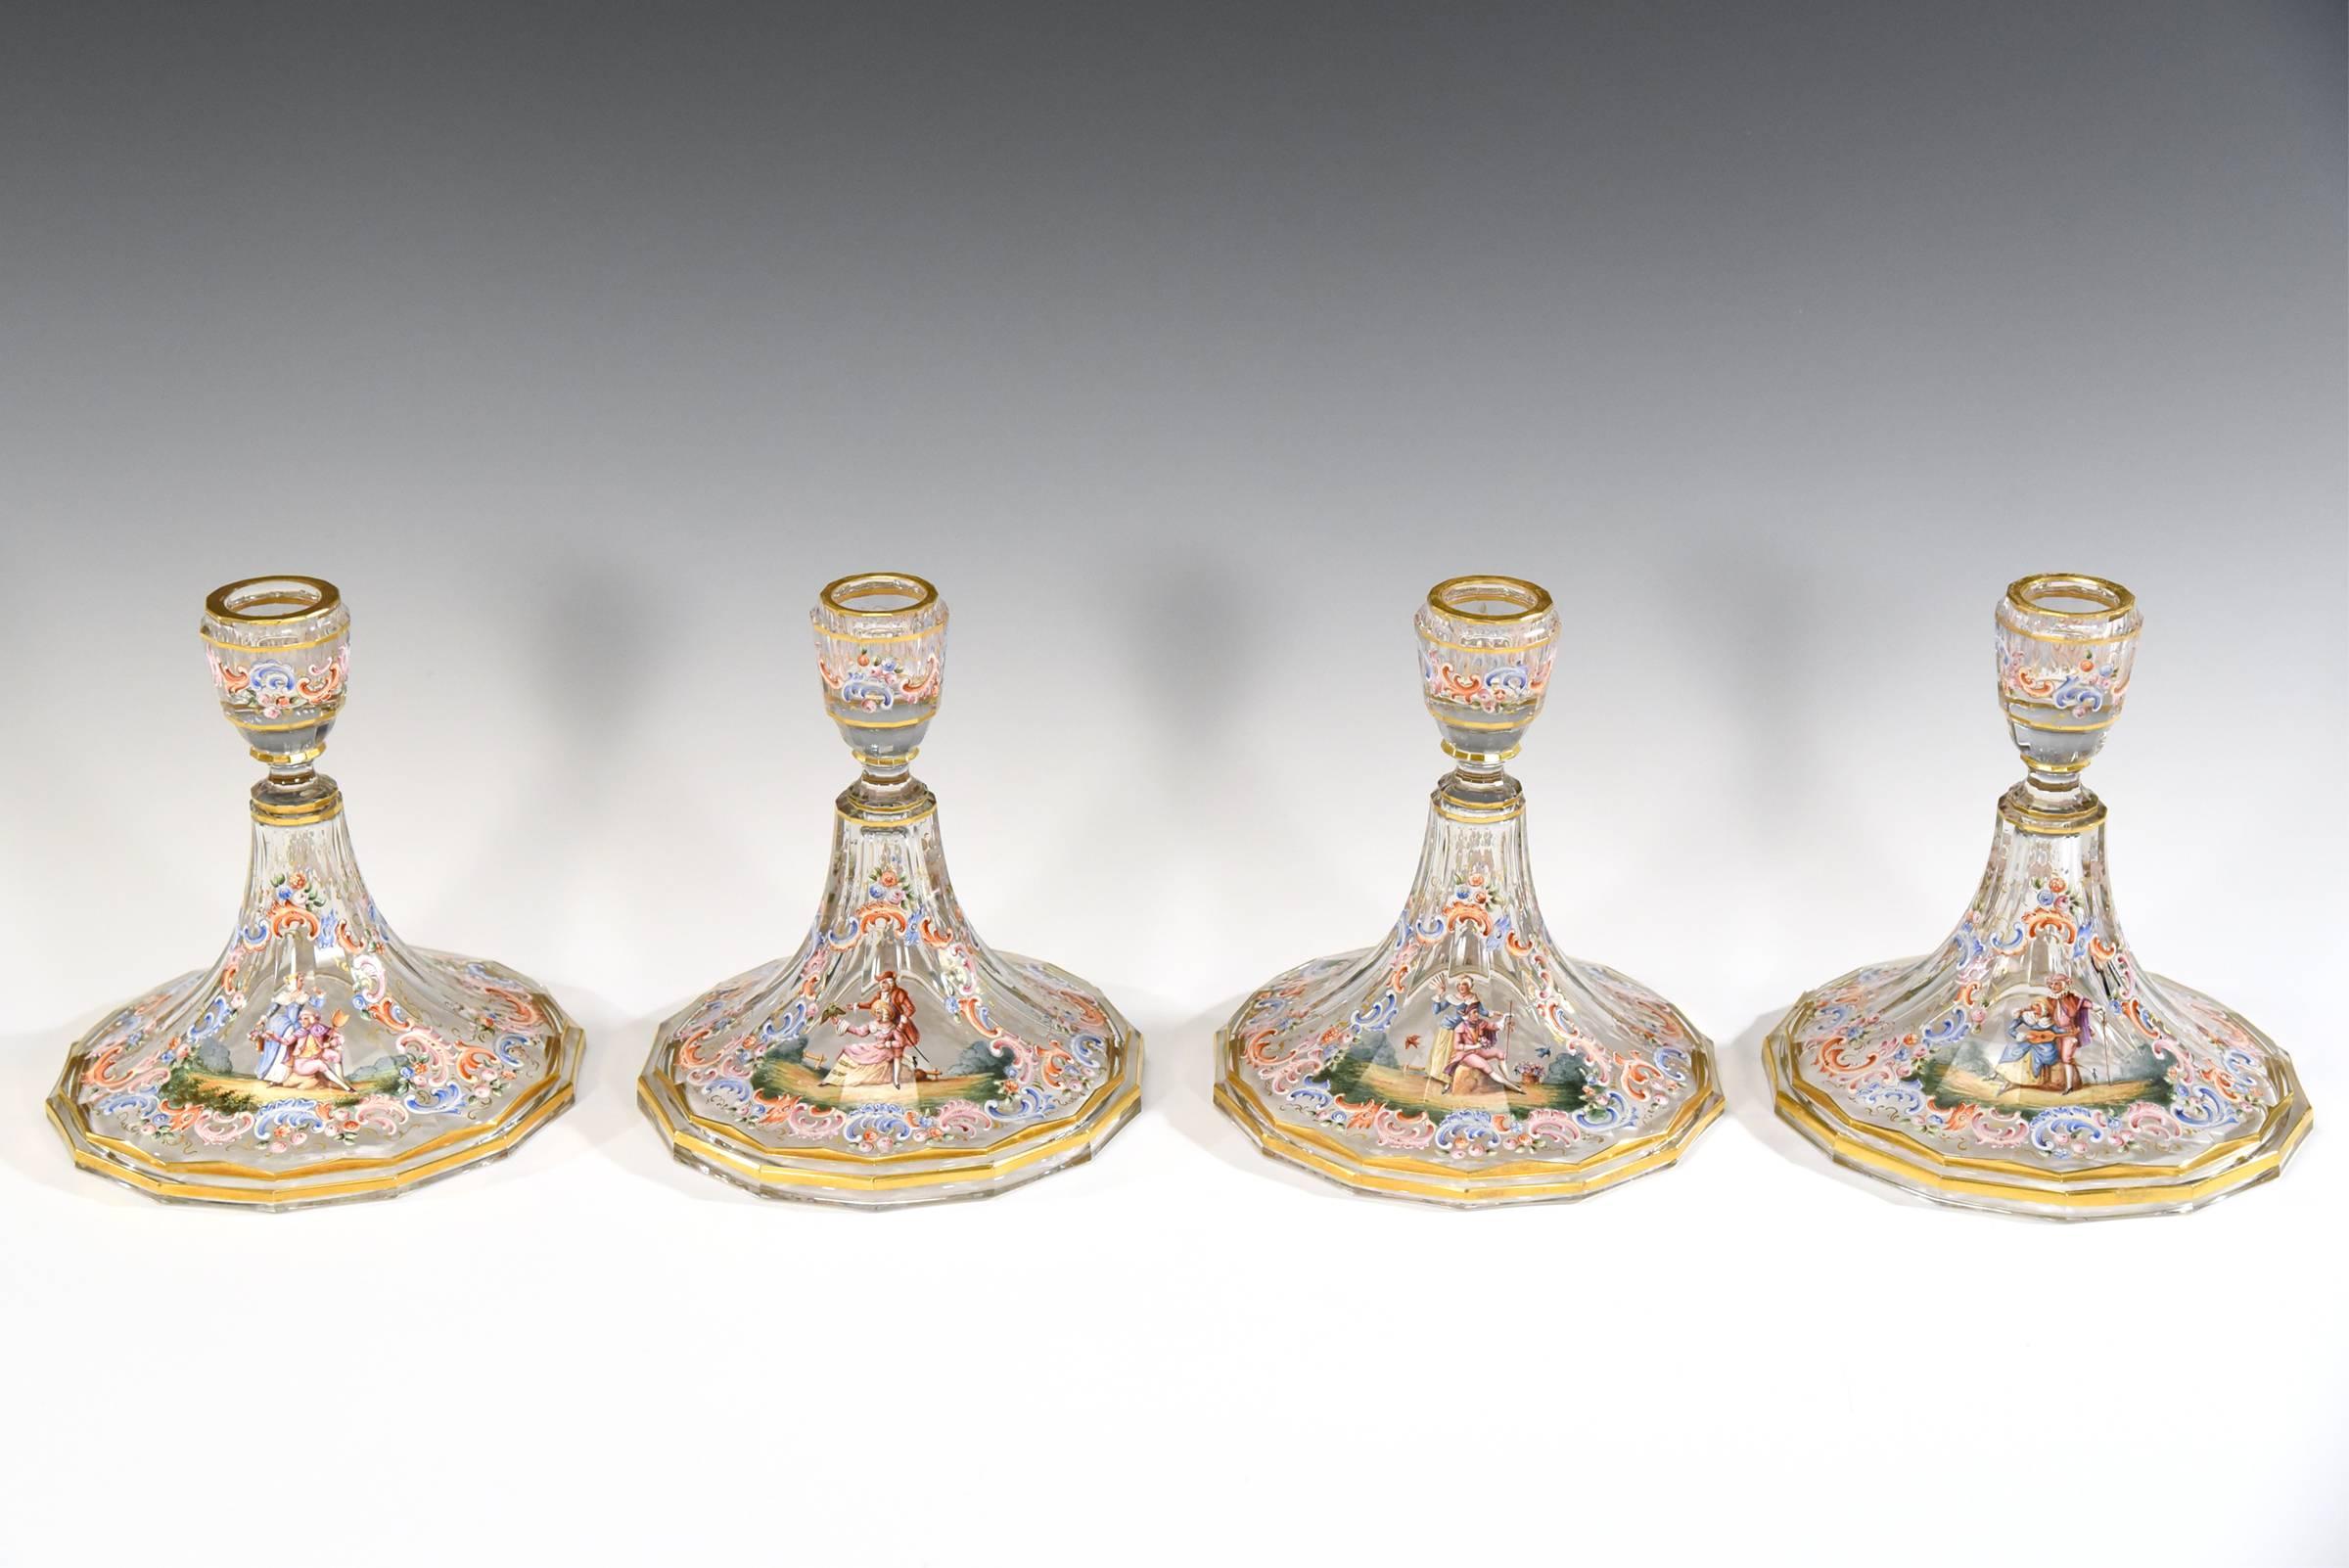 It is rare to find any candlesticks in this pattern, made by Lobmeyr but here is a set of four. Perfect for a large table, each one is hand blown crystal, panel cut and uniquely hand-painted in polychrome enamel with great detail of courting couples